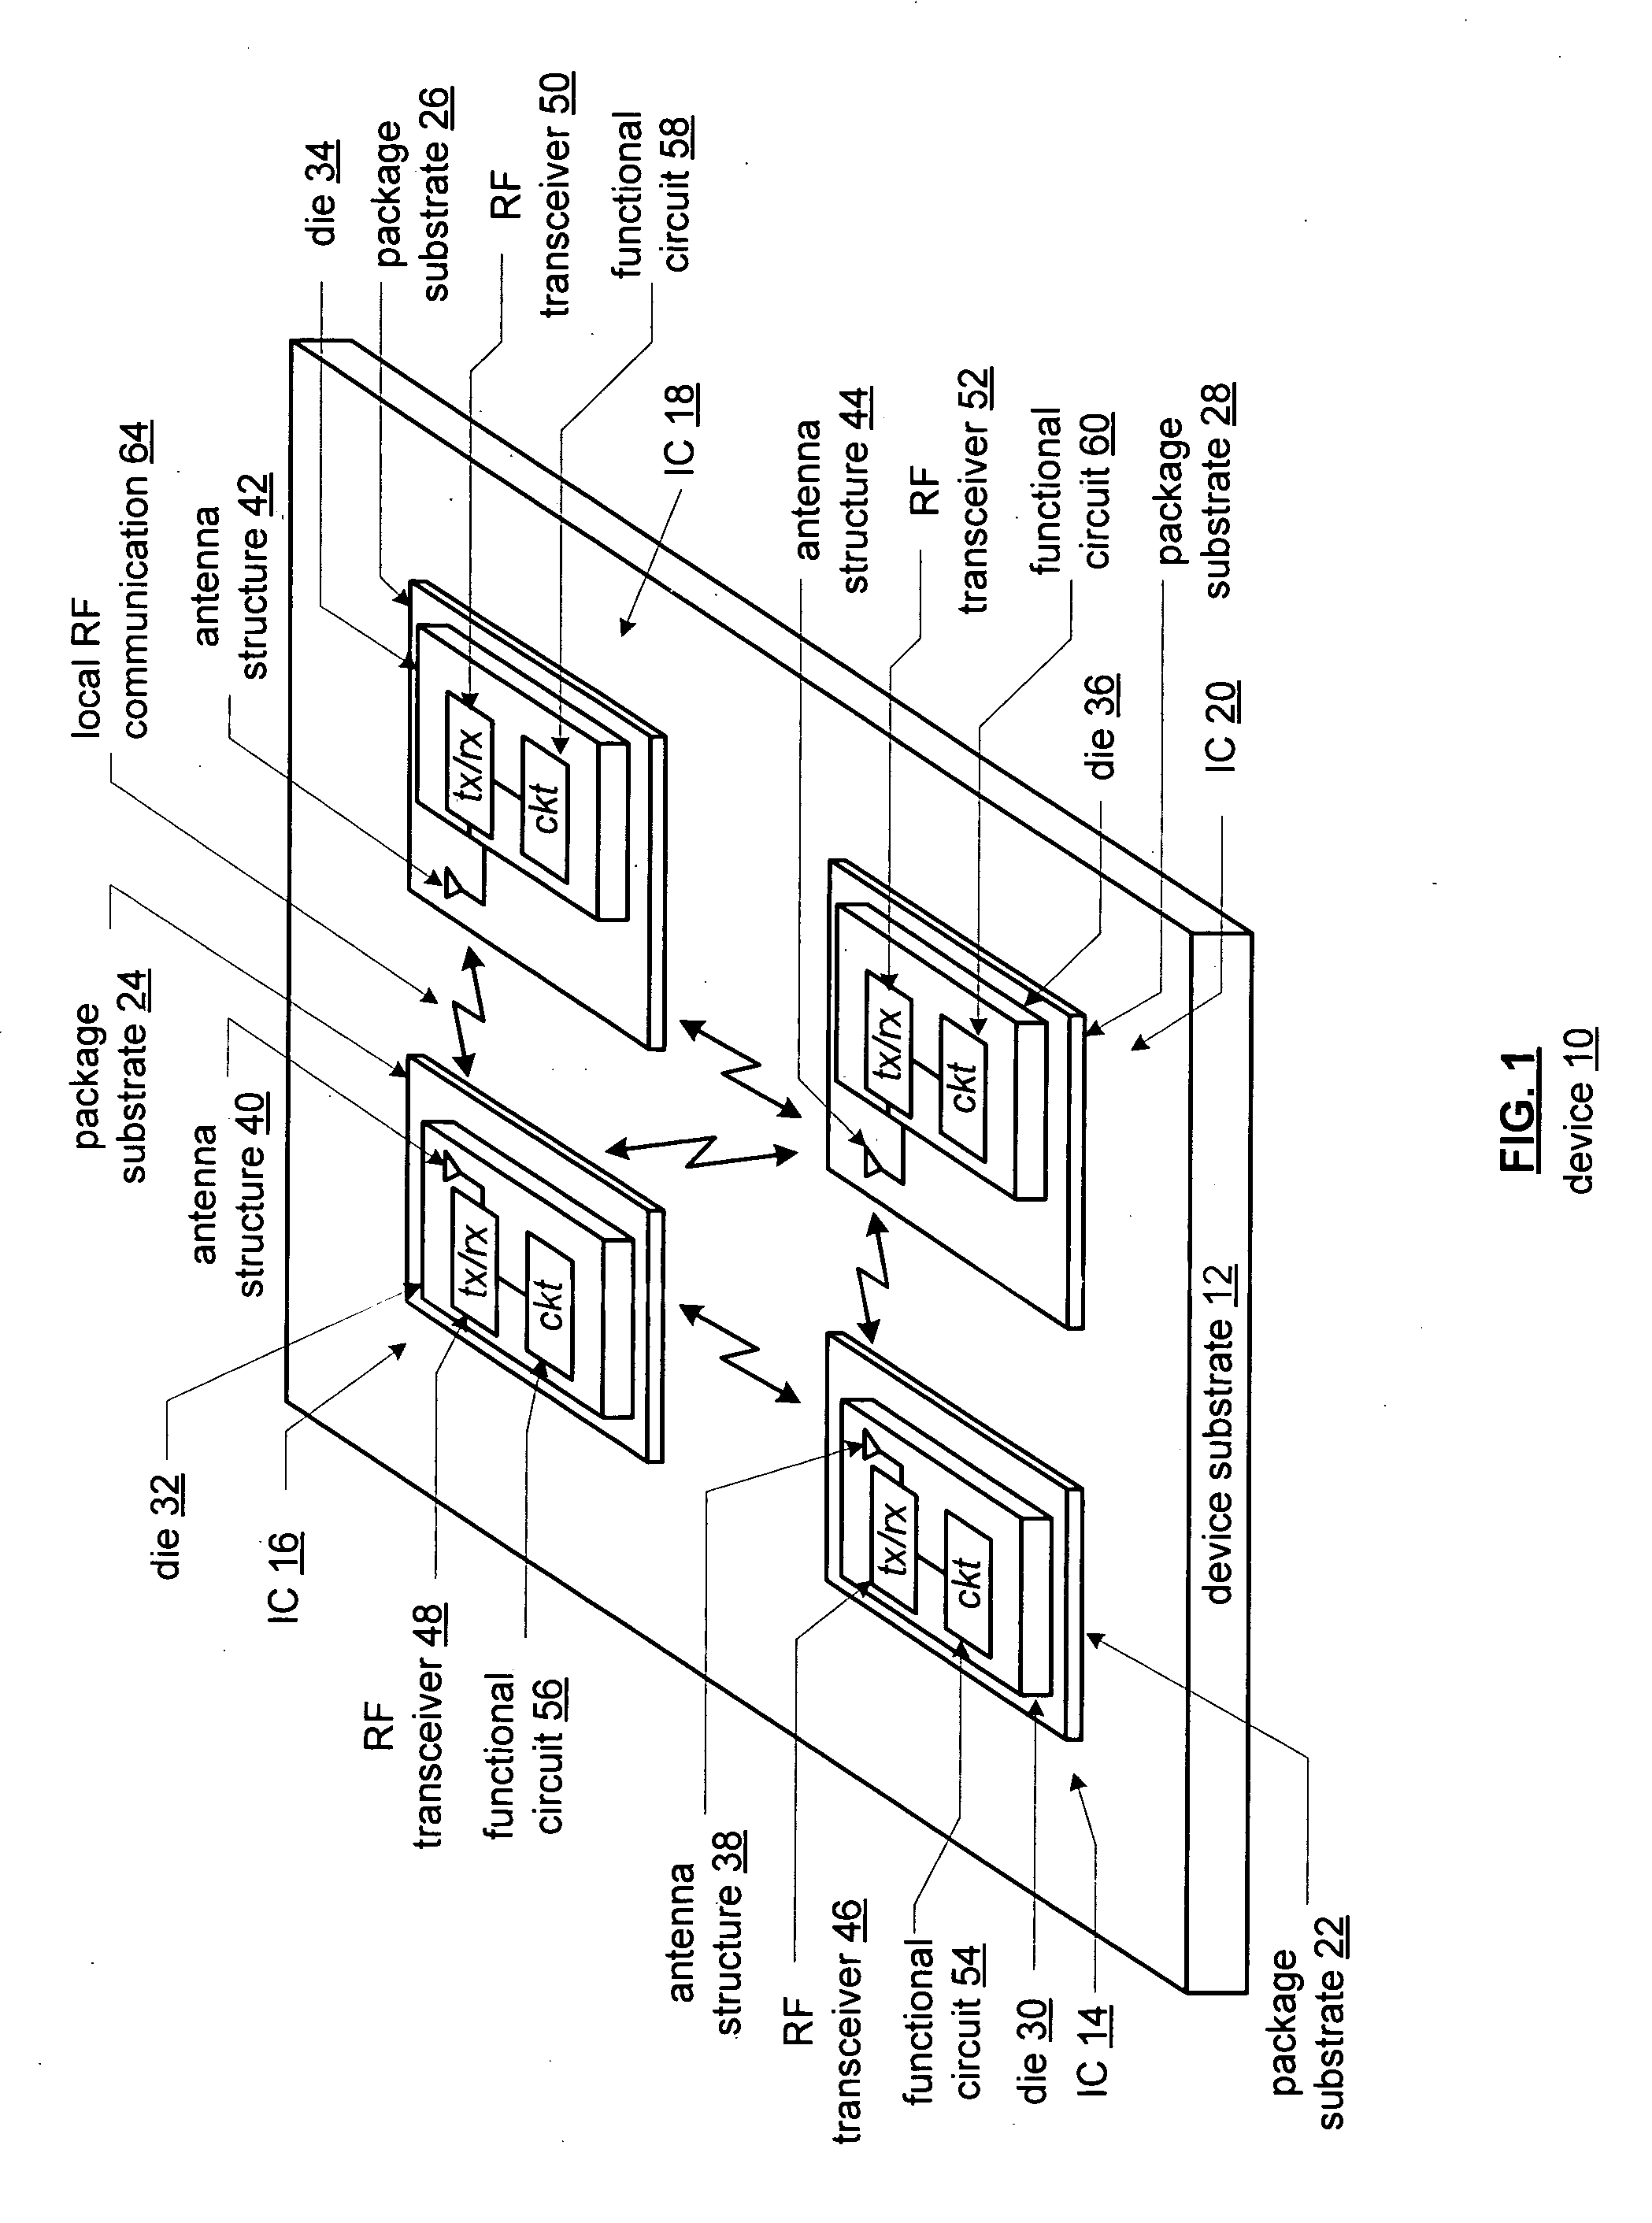 Adjustable integrated circuit antenna structure